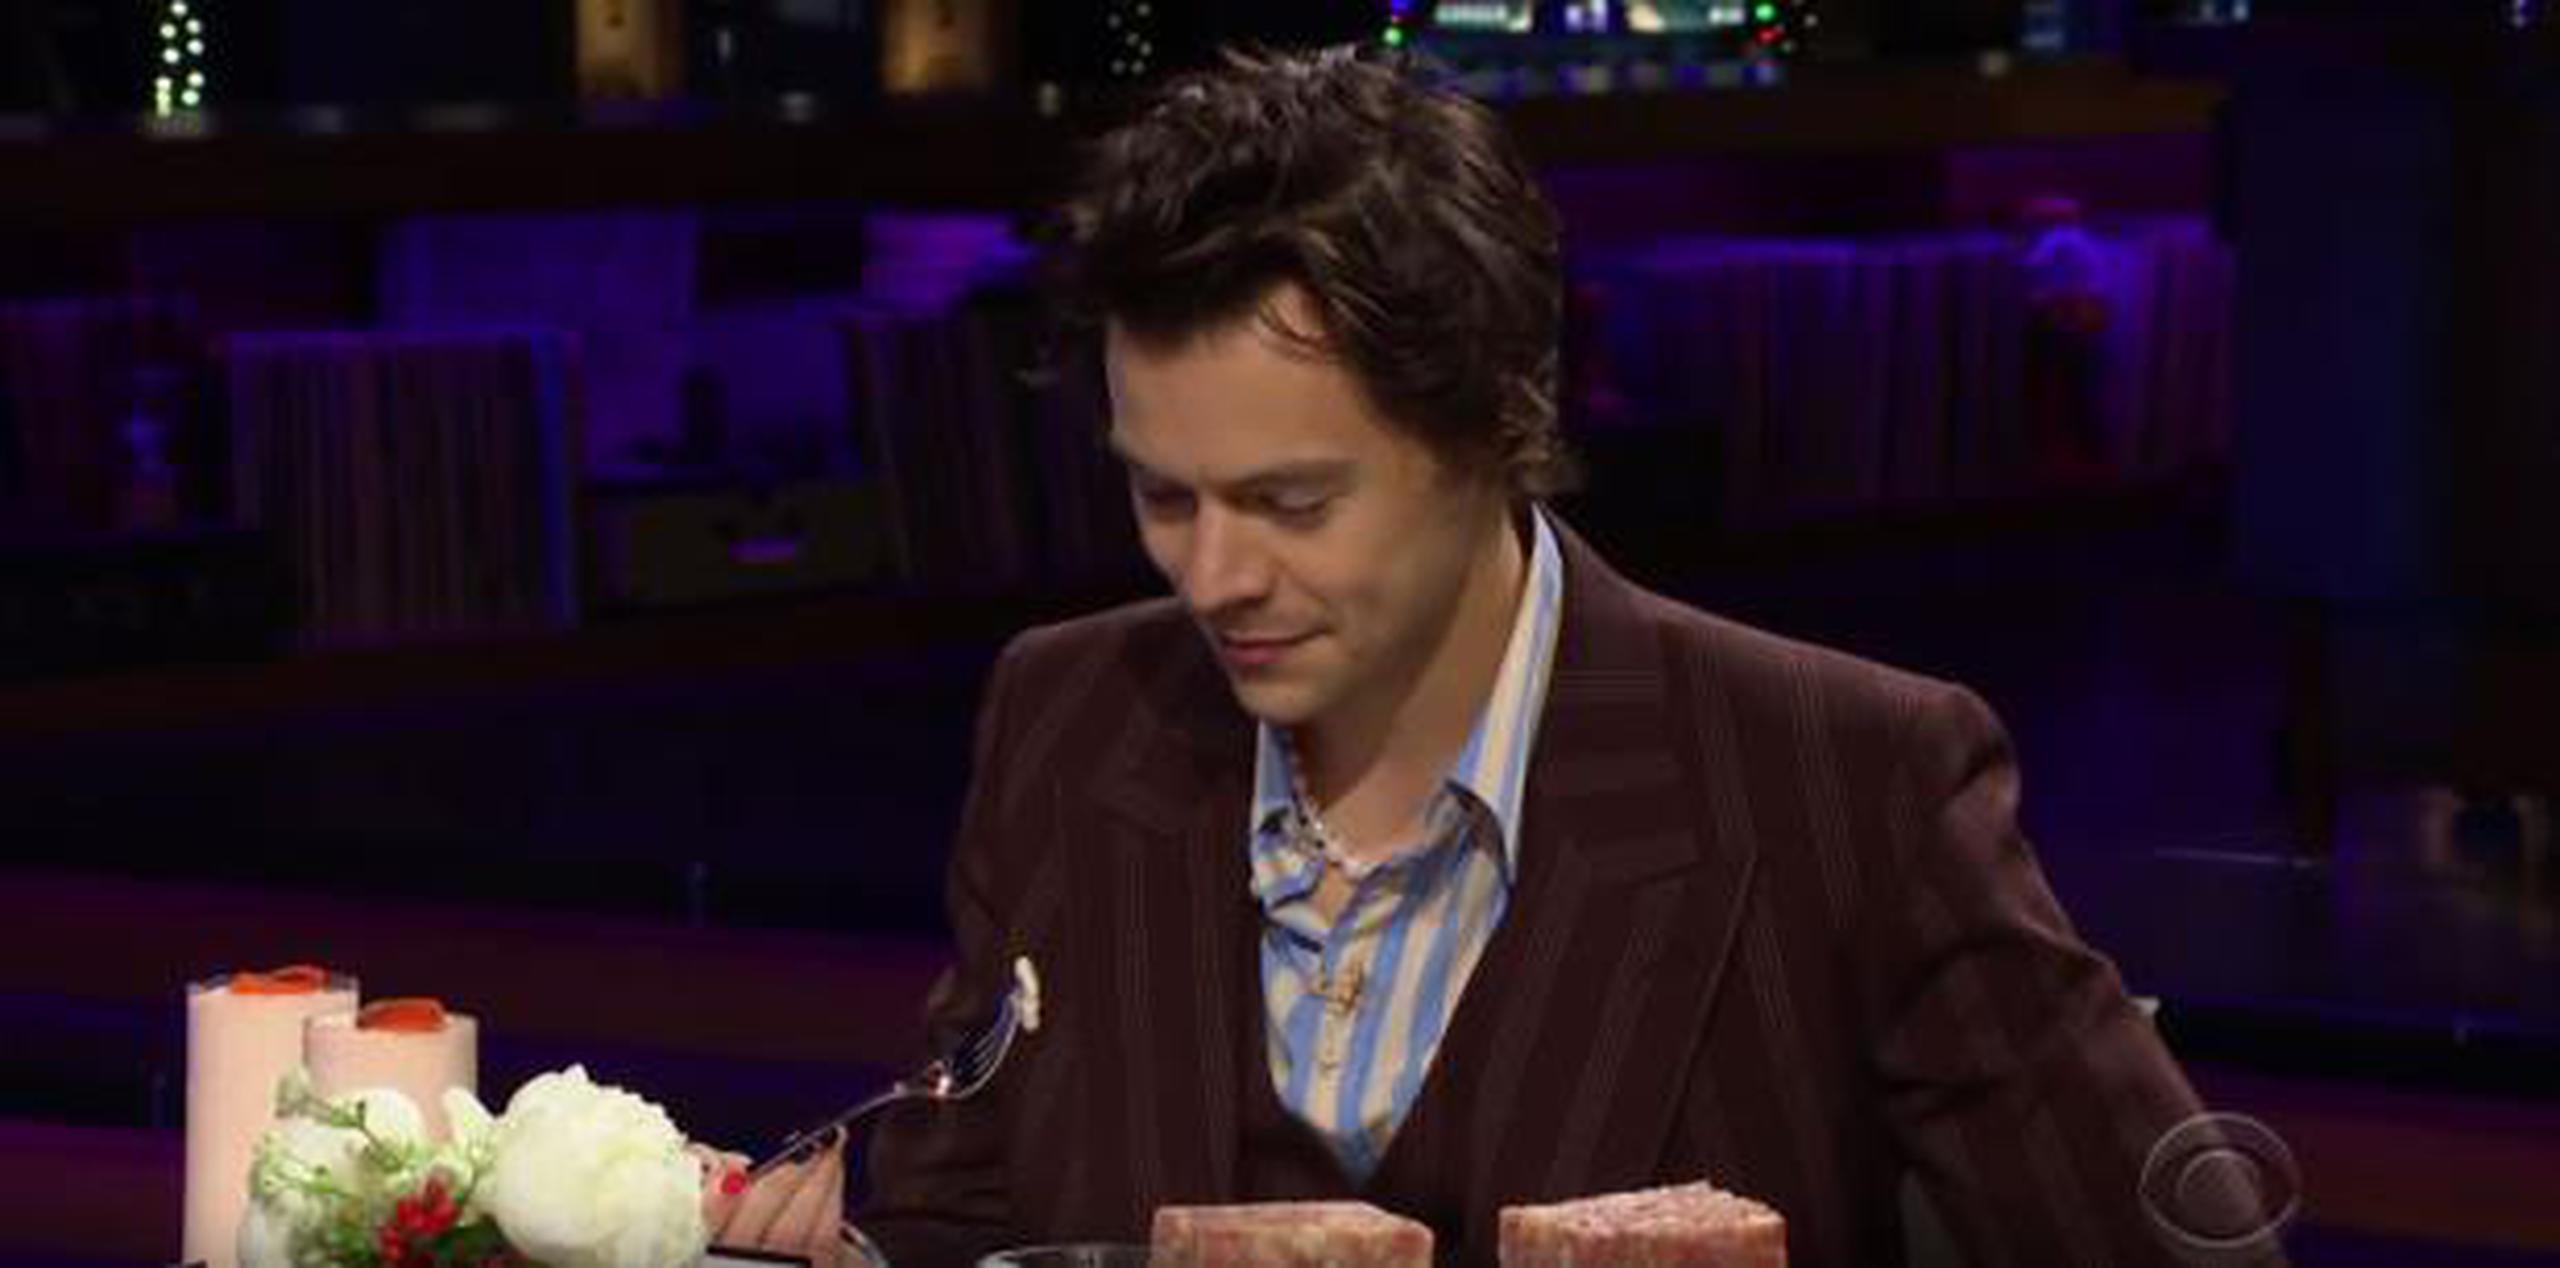 Harry Styles en "The Late Late Show with James Corden". (YouTube / CBS)